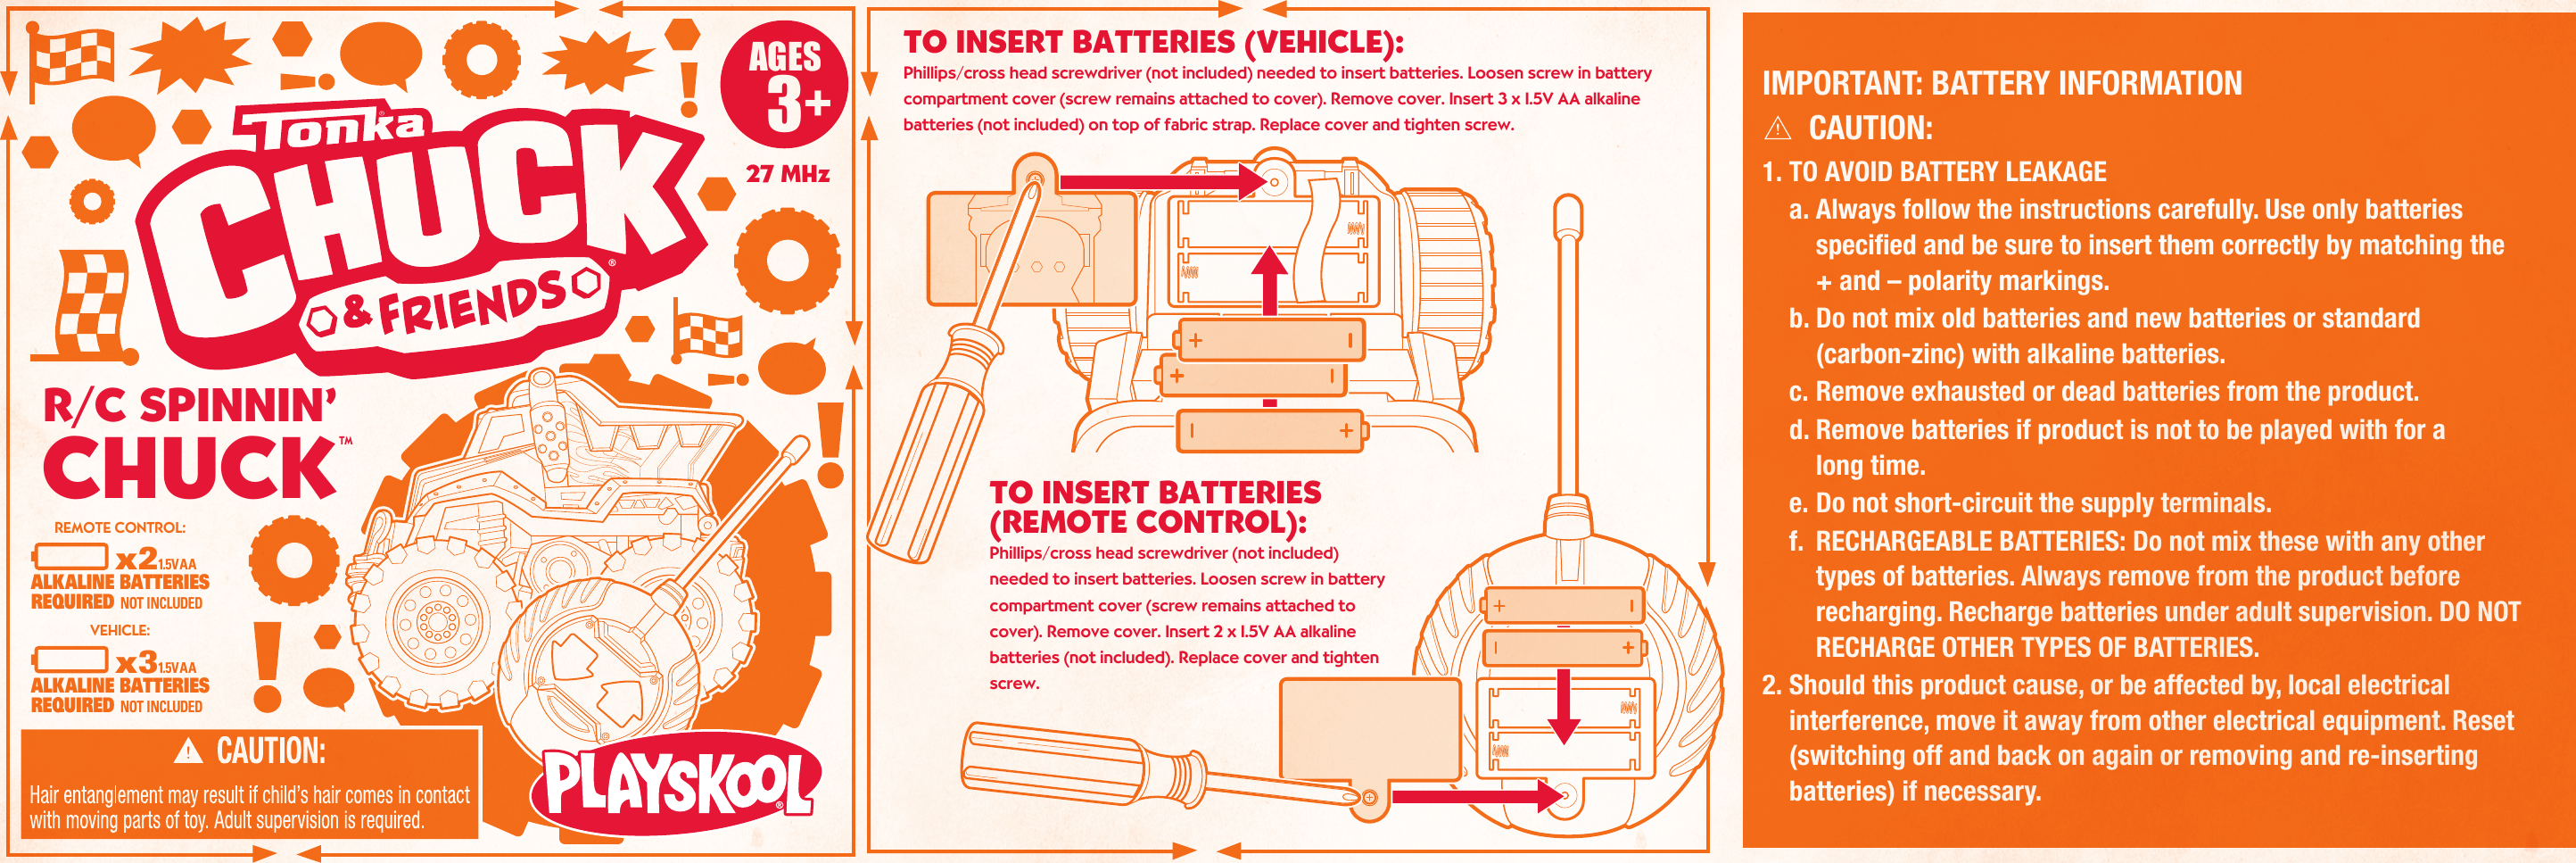  AGES3+TO INSERT BATTERIES (VEHICLE): Phillips/cross head screwdriver (not included) needed to insert batteries. Loosen screw in battery compartment cover (screw remains attached to cover). Remove cover. Insert 3 x 1.5V AA alkaline batteries (not included) on top of fabric strap. Replace cover and tighten screw. TO INSERT BATTERIES(REMOTE CONTROL): Phillips/cross head screwdriver (not included) needed to insert batteries. Loosen screw in battery compartment cover (screw remains attached to cover). Remove cover. Insert 2 x 1.5V AA alkaline batteries (not included). Replace cover and tighten screw. IMPORTANT: BATTERY INFORMATIONCAUTION:1. TO AVOID BATTERY LEAKAGEa. Always follow the instructions carefully. Use only batteriesspecified and be sure to insert them correctly by matching the+ and – polarity markings.b. Do not mix old batteries and new batteries or standard(carbon-zinc) with alkaline batteries.c. Remove exhausted or dead batteries from the product.d. Remove batteries if product is not to be played with for along time. e. Do not short-circuit the supply terminals.f.  RECHARGEABLE BATTERIES: Do not mix these with any other types of batteries. Always remove from the product before recharging. Recharge batteries under adult supervision. DO NOT RECHARGE OTHER TYPES OF BATTERIES.2. Should this product cause, or be affected by, local electricalinterference, move it away from other electrical equipment. Reset (switching off and back on again or removing and re-insertingbatteries) if necessary.27 MHz     x21.5V AAALKALINE BATTERIESREQUIRED NOT INCLUDED     x31.5V AAALKALINE BATTERIESREQUIRED NOT INCLUDEDREMOTE CONTROL:VEHICLE: TMR/C SPINNIN’CHUCK